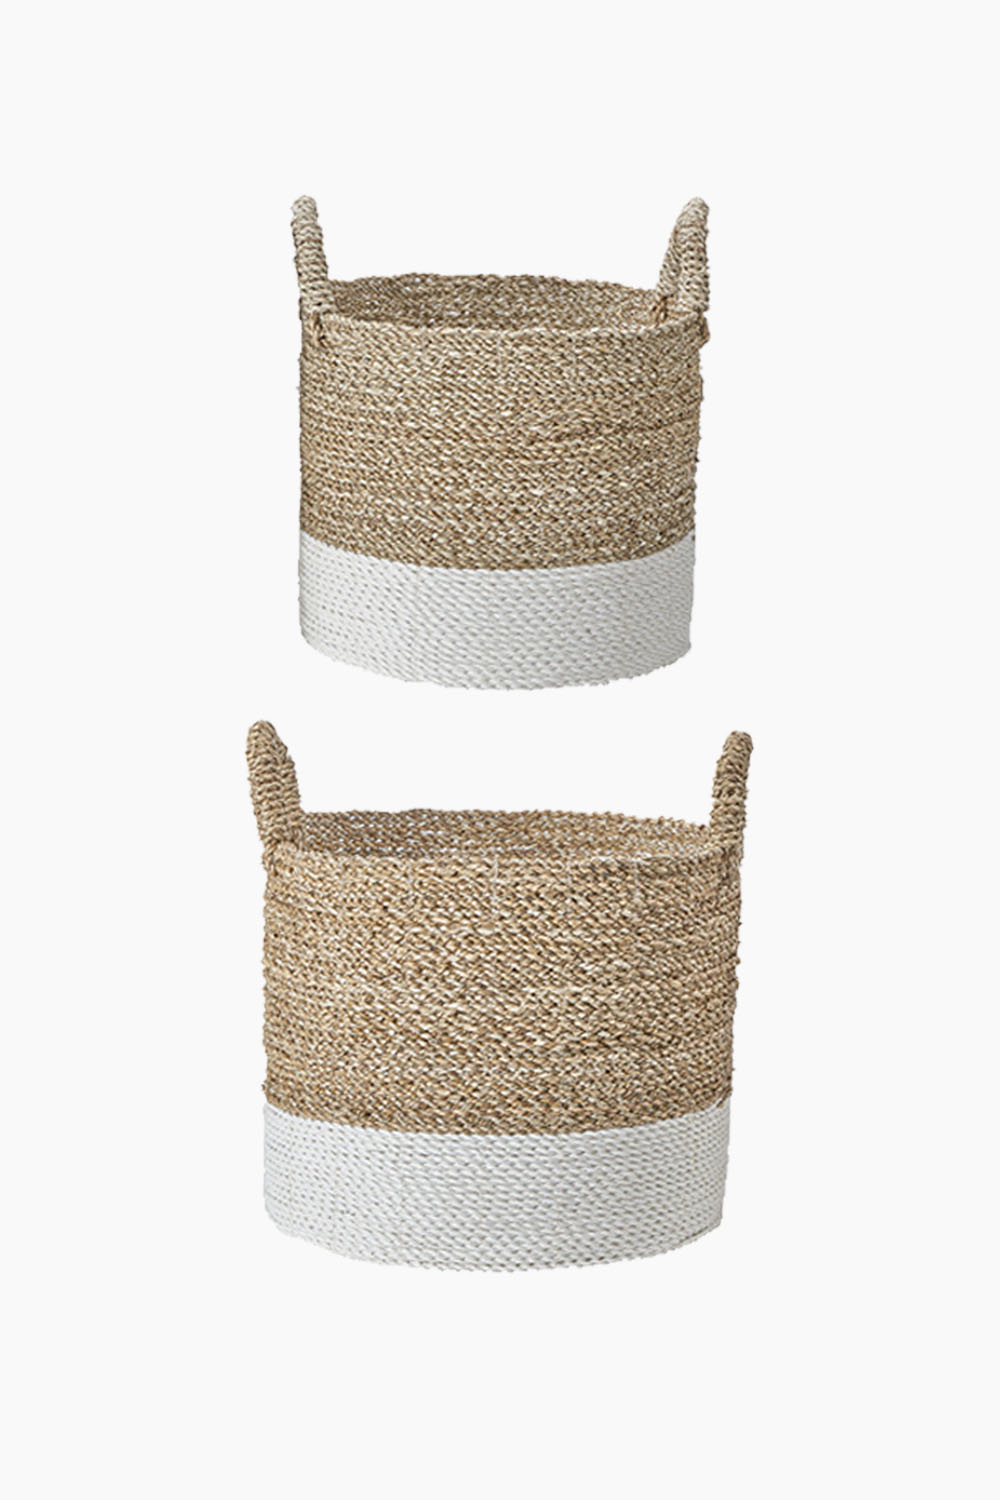 Banana Leaf Two Tone Natural and White Baskets Set of 2